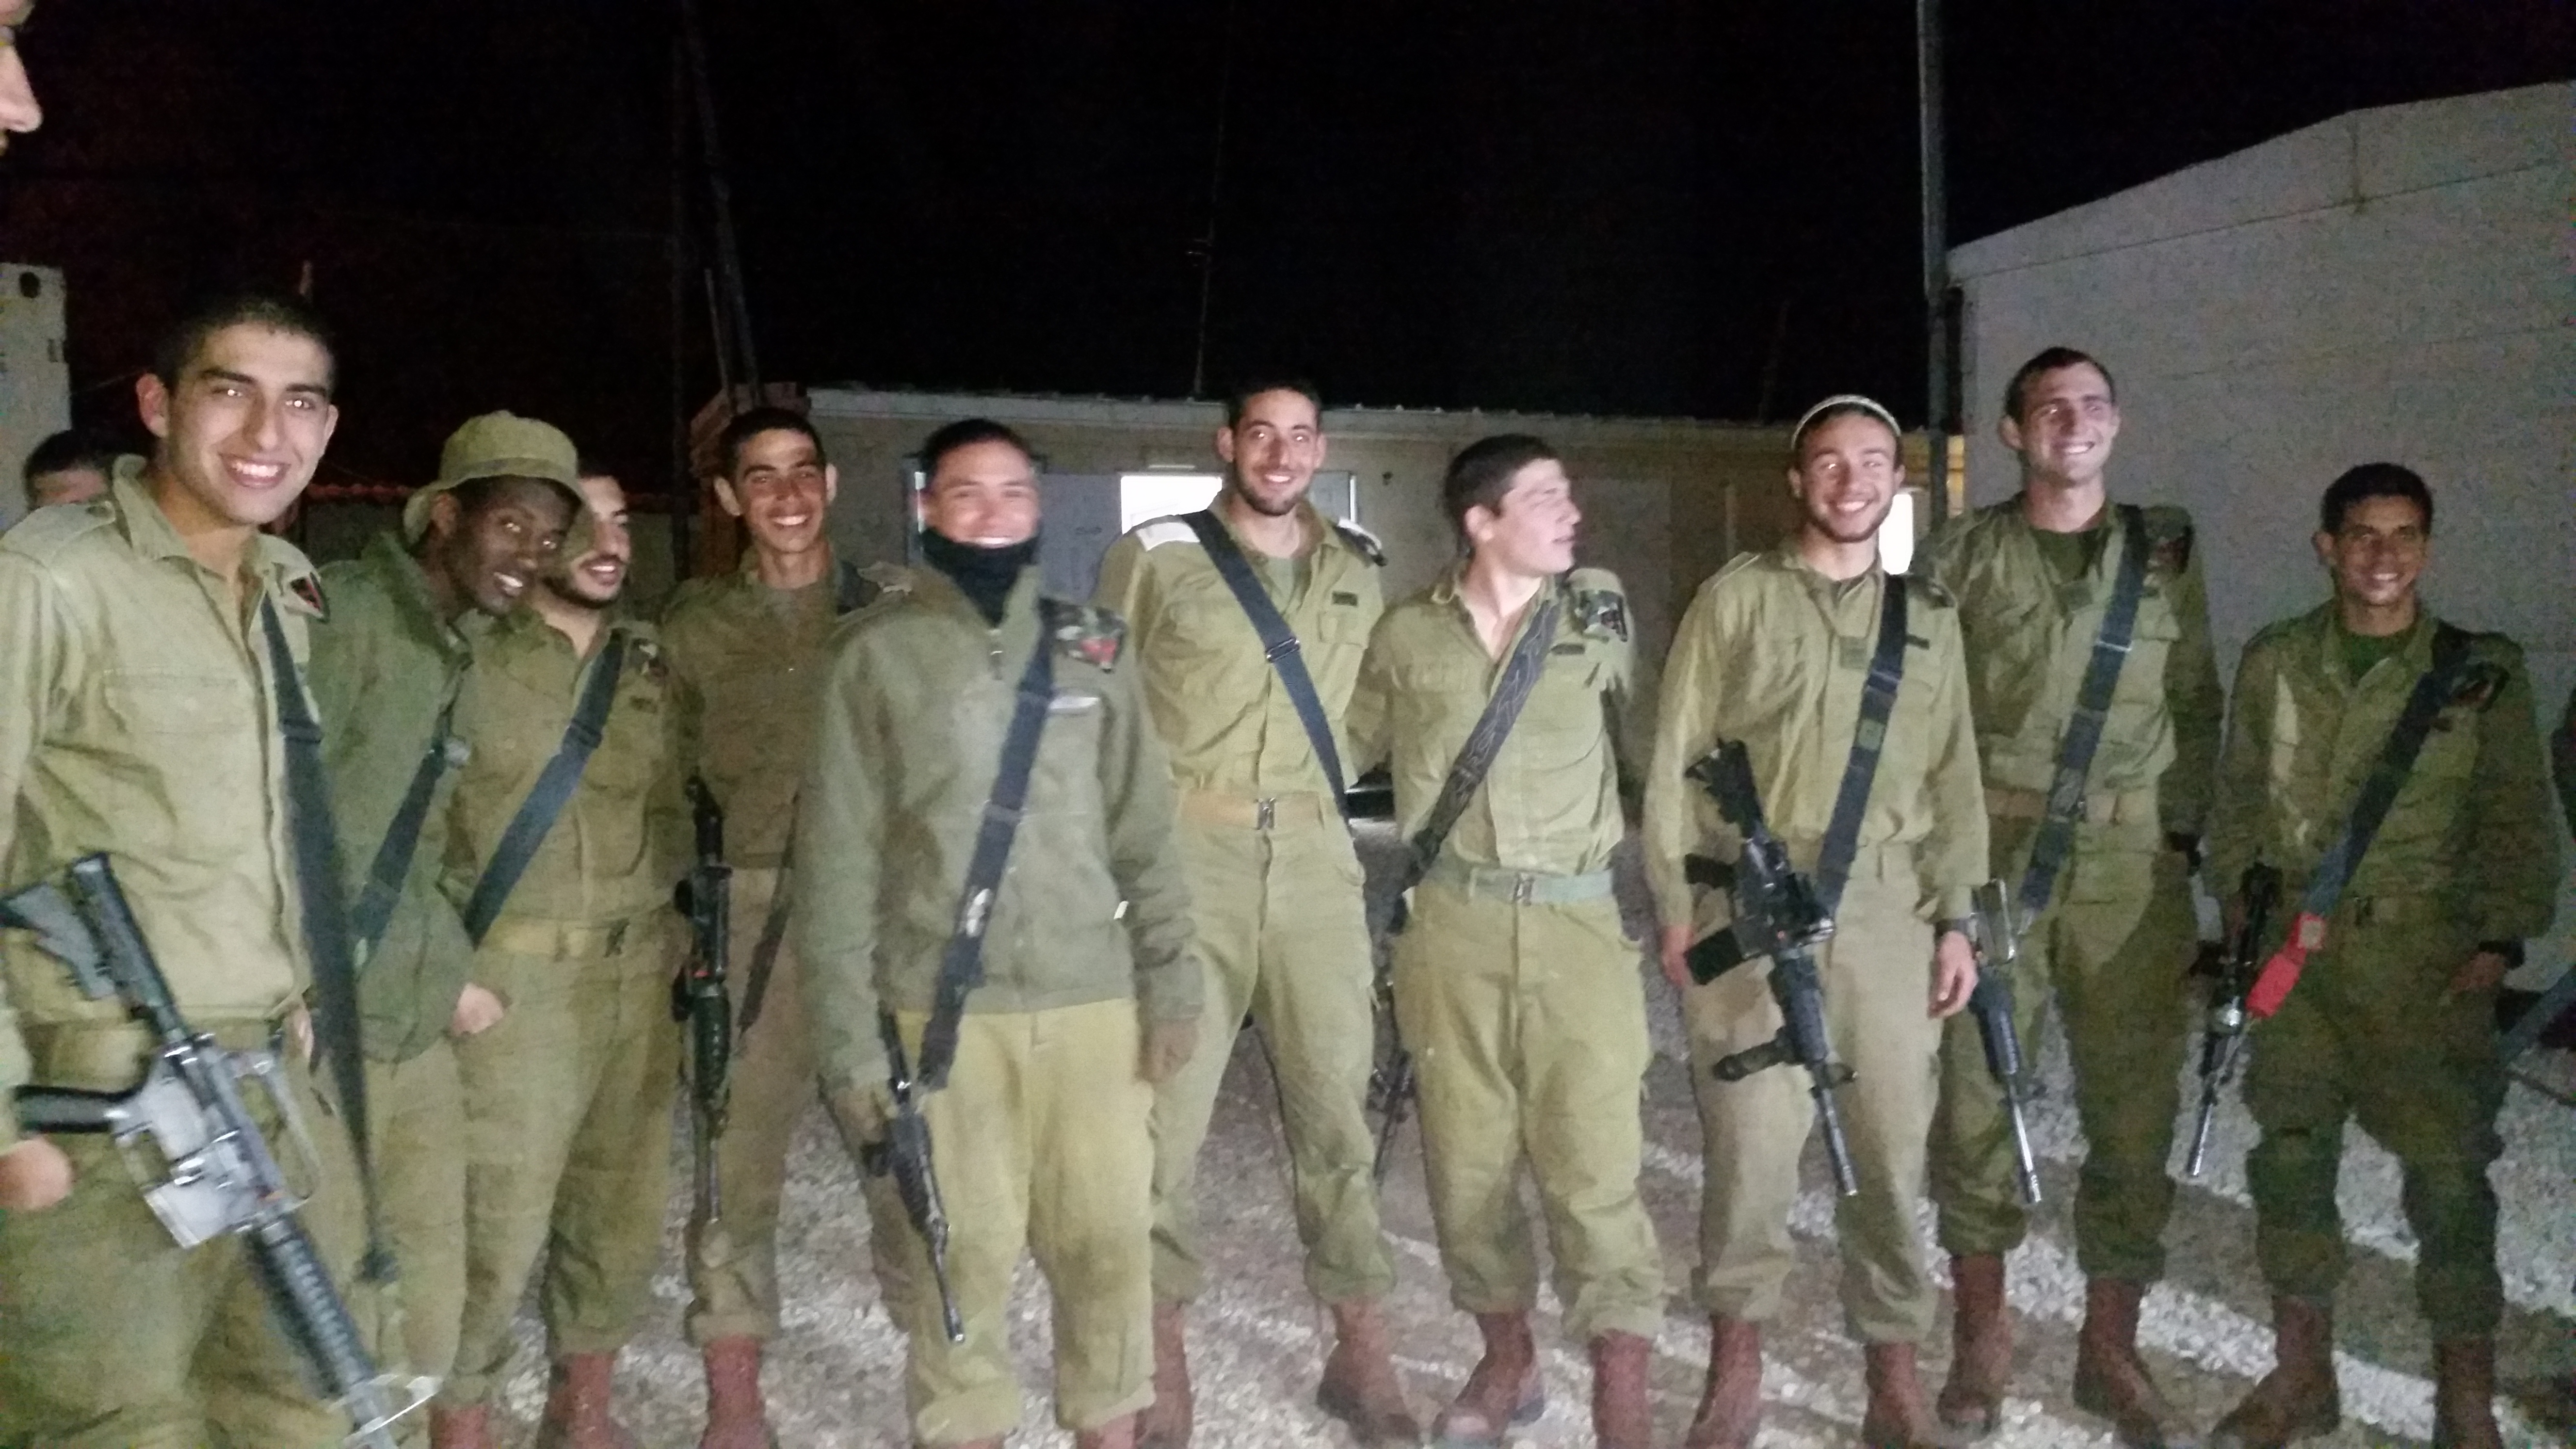 My Visit to an Israeli Army Base